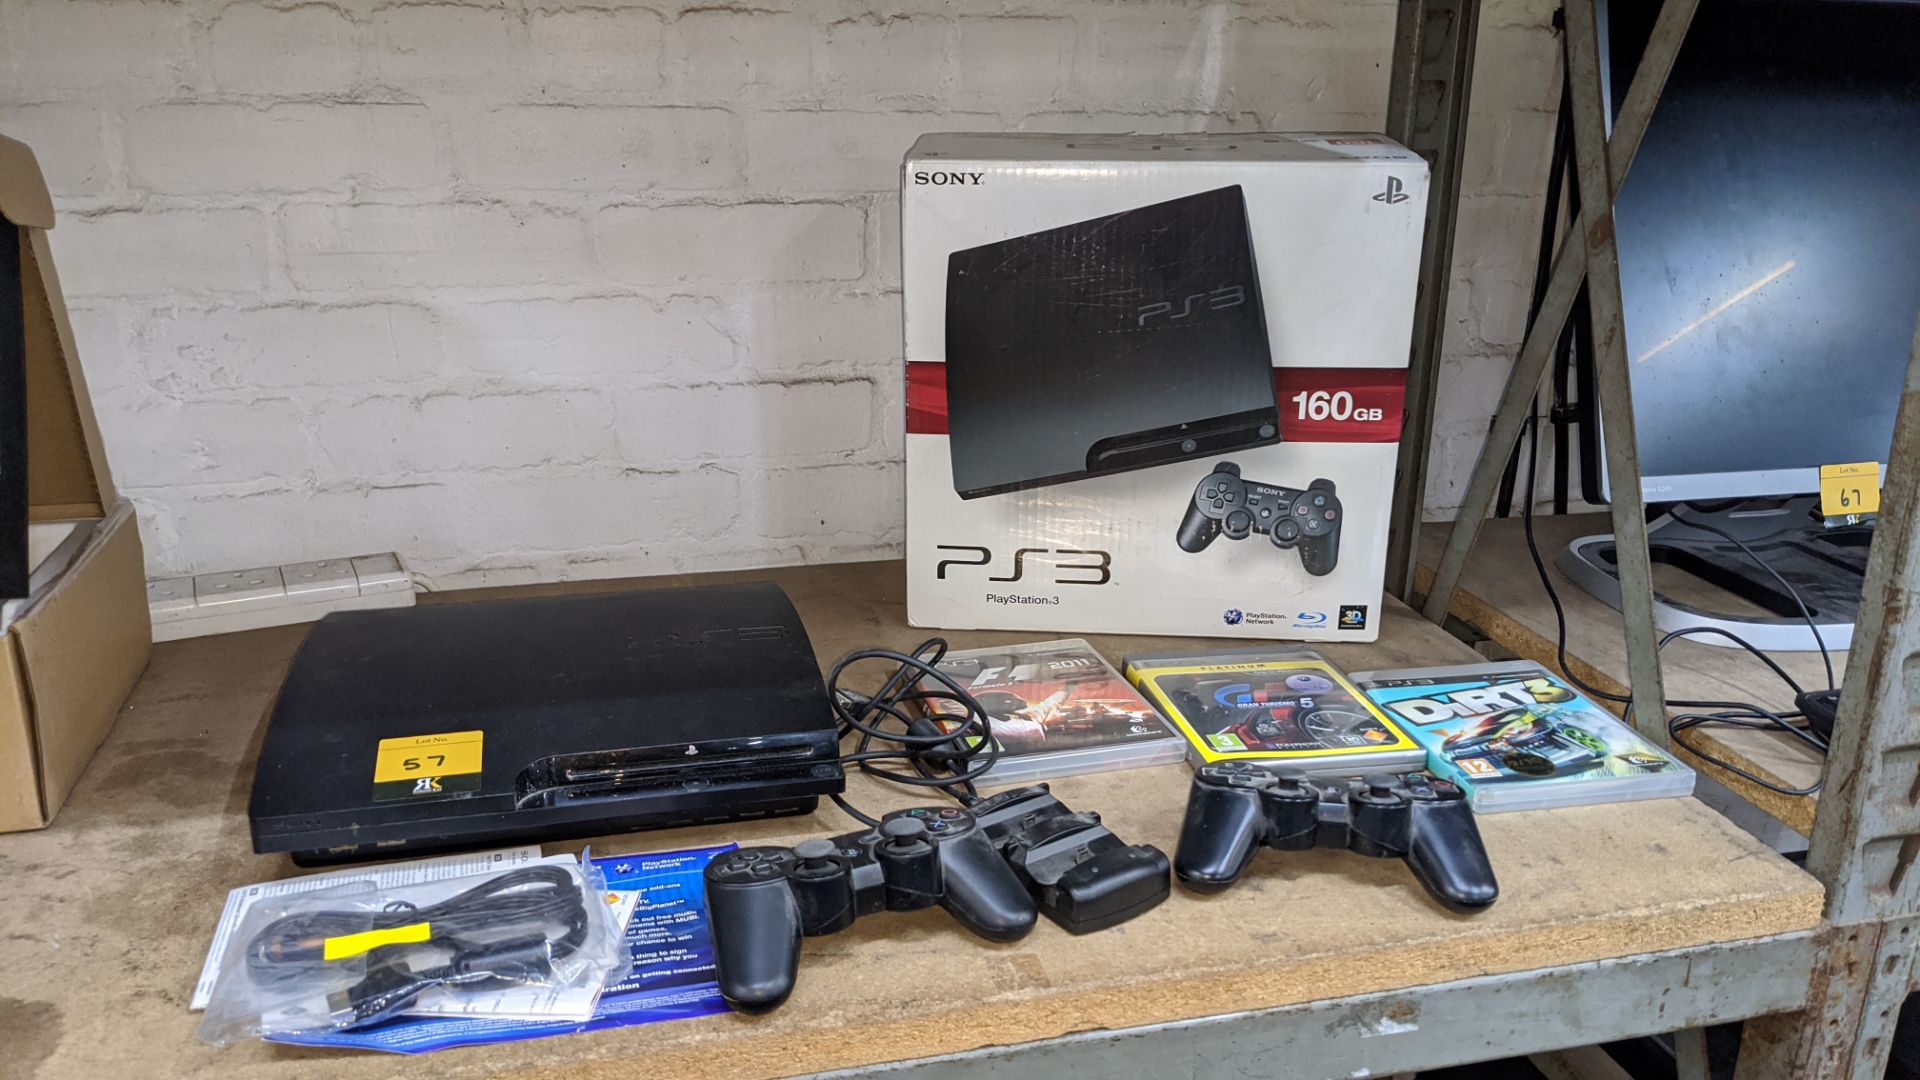 Sony PS3 gaming console, 160Gb, including 2 off Dual Shock 3 SIXAXIS wireless controllers and dock - Image 3 of 11